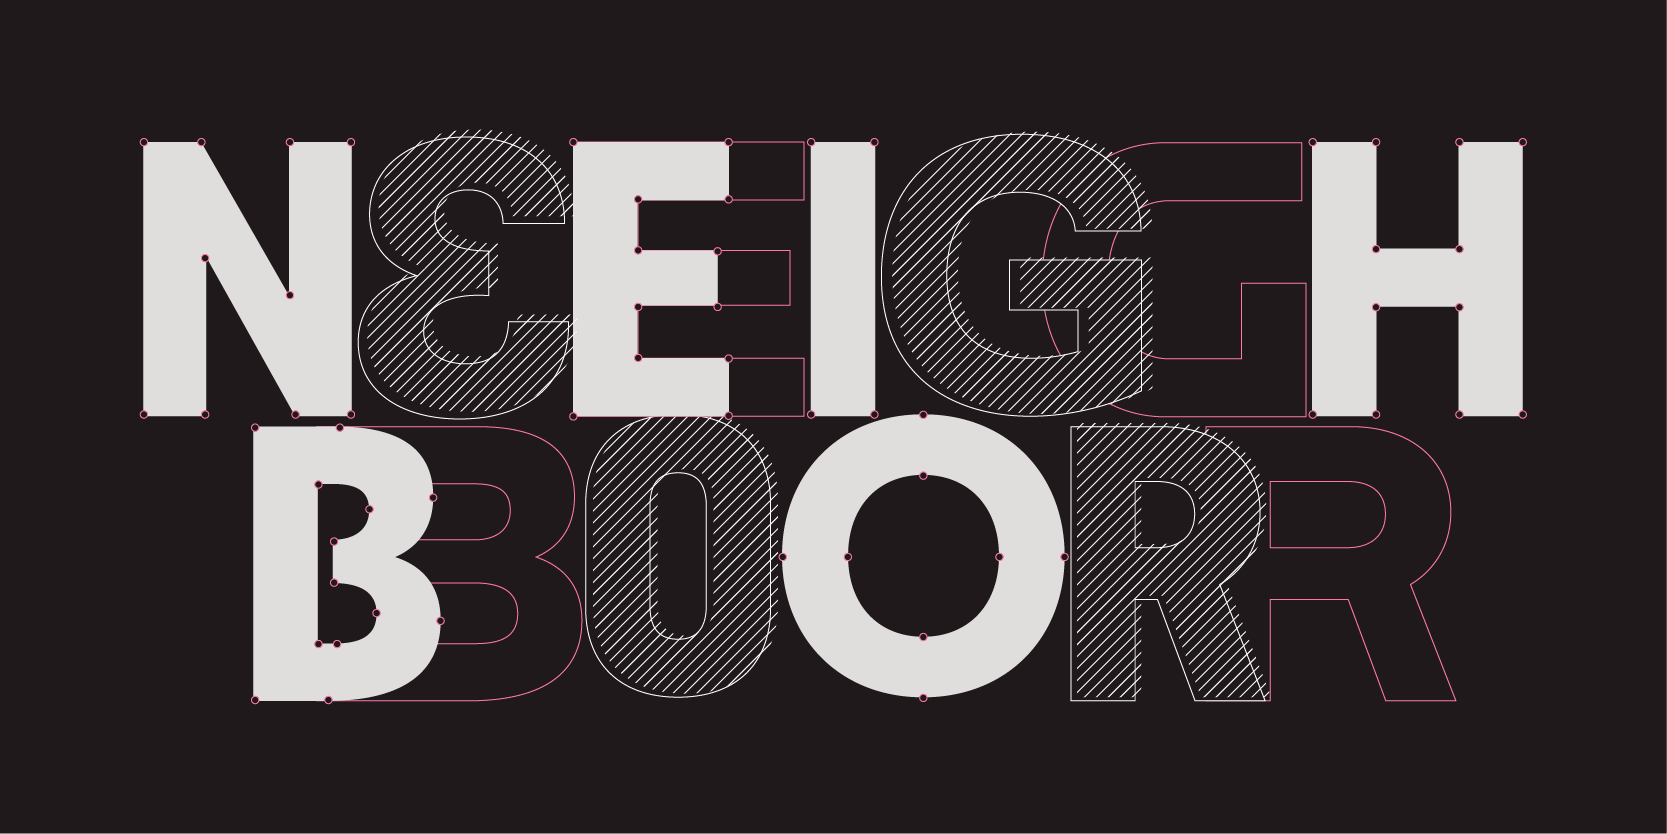 Card displaying Neighbor typeface in various styles